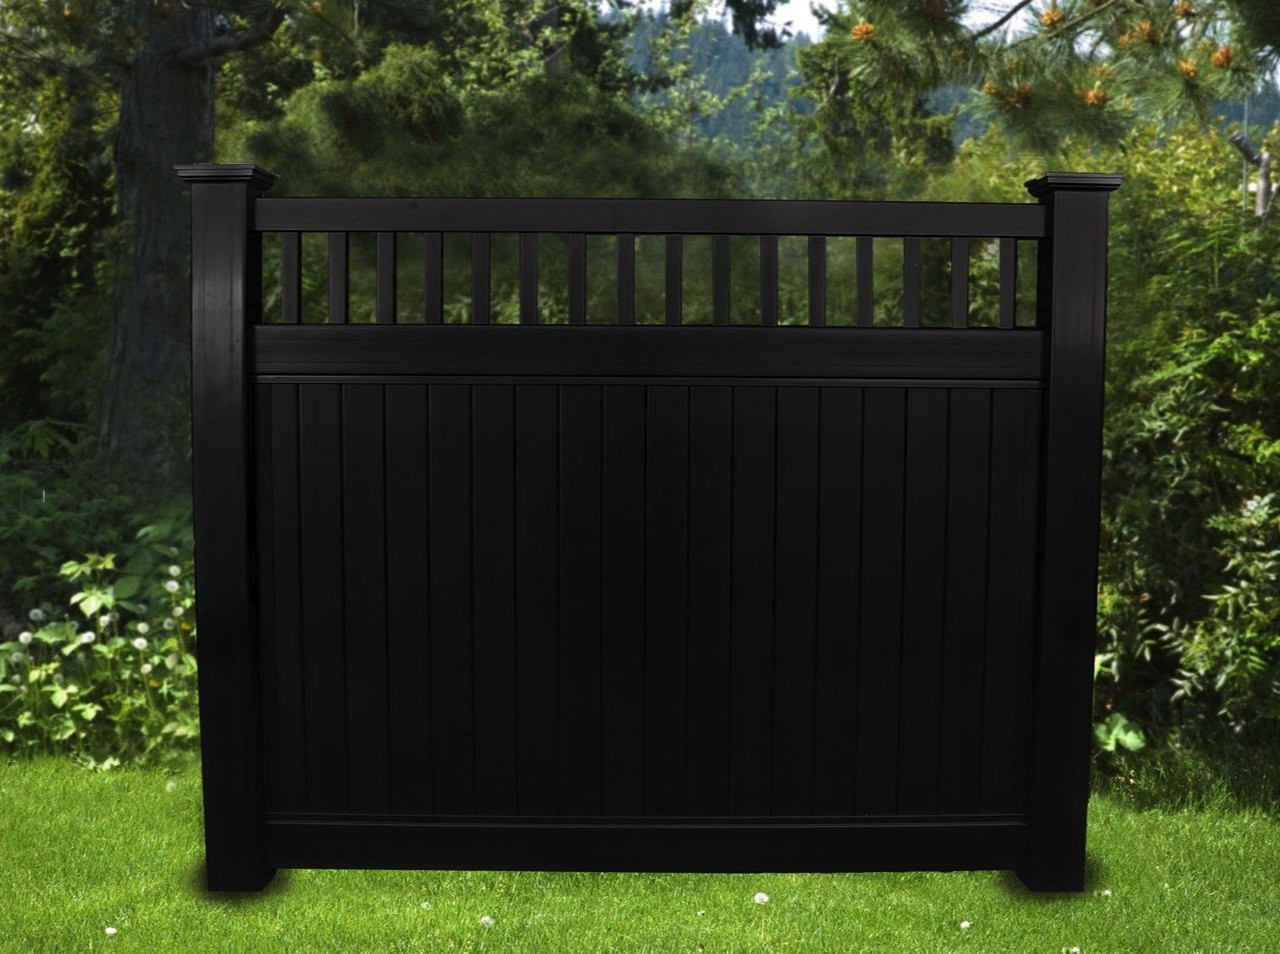 BLACK VINYL PRIVACY PICKET TOP FENCE 6 FT X 6 FT. Posts purchased seprately